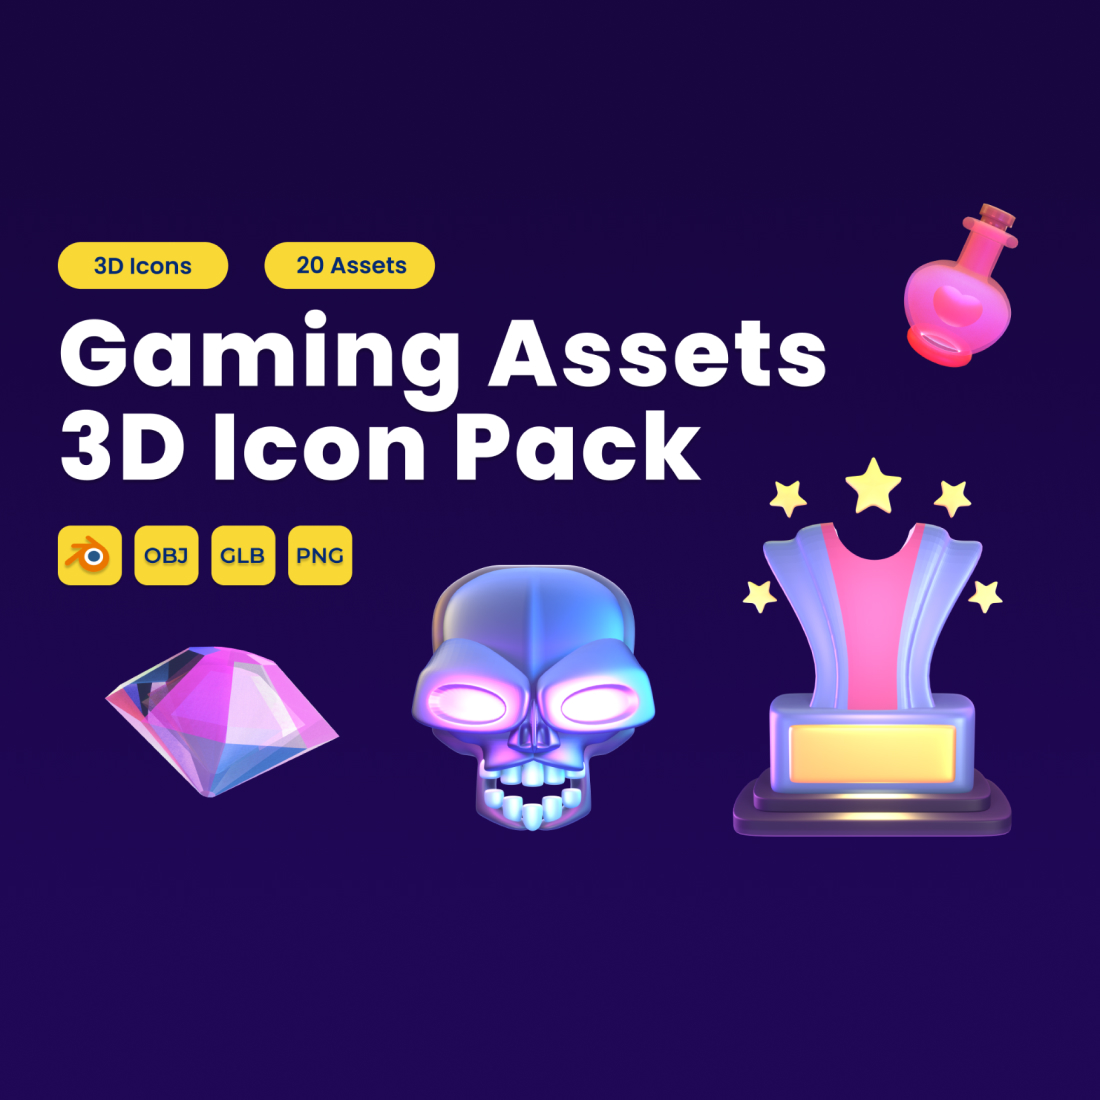 Gaming Asset 3D Icon Pack Vol 6 cover image.